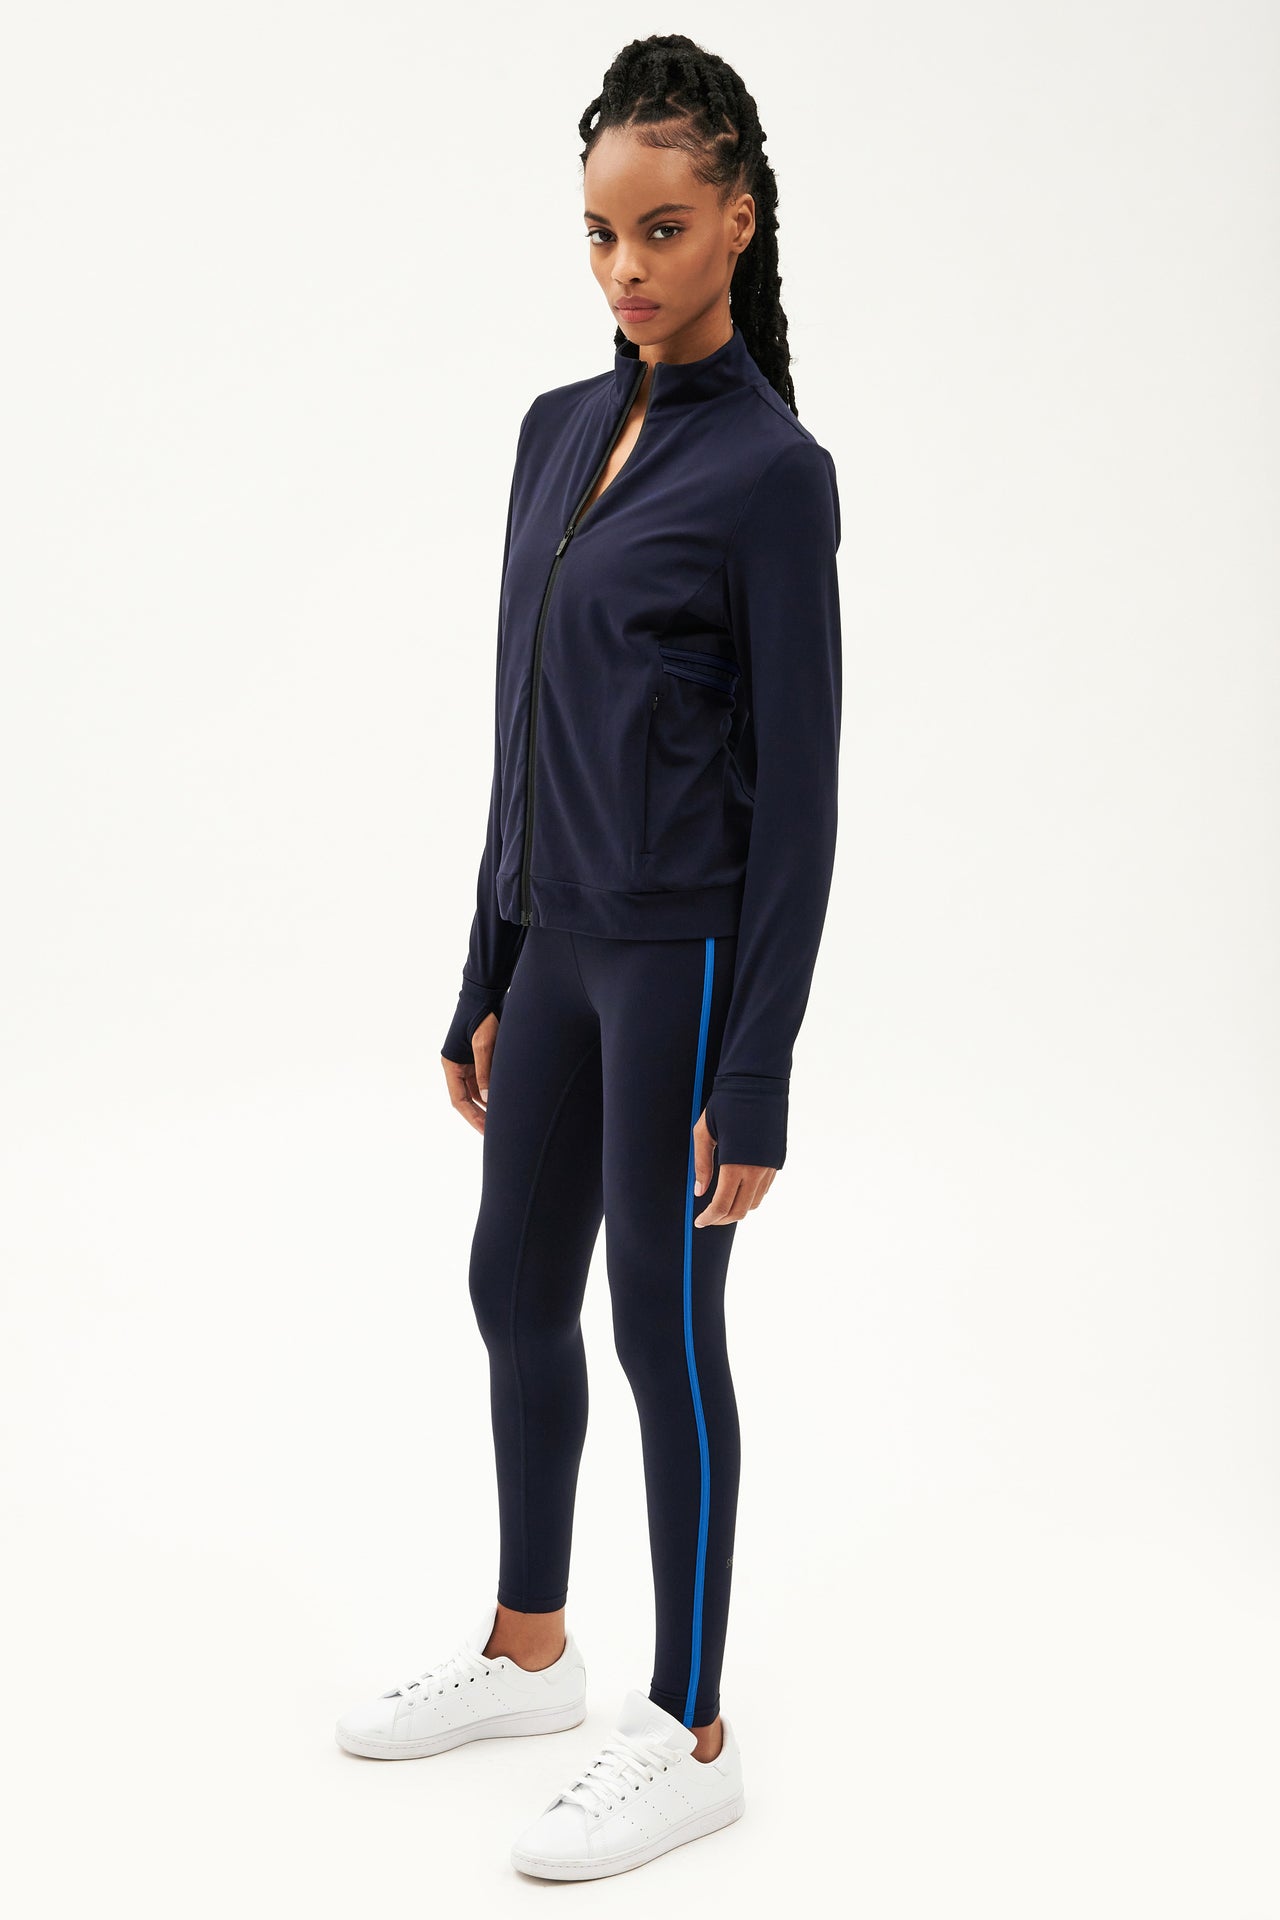 A woman wearing a SPLITS59 navy tracksuit with sleek aerodynamic lines and blue leggings designed for hot yoga, featuring the Rain Airweight Jacket in Indigo.